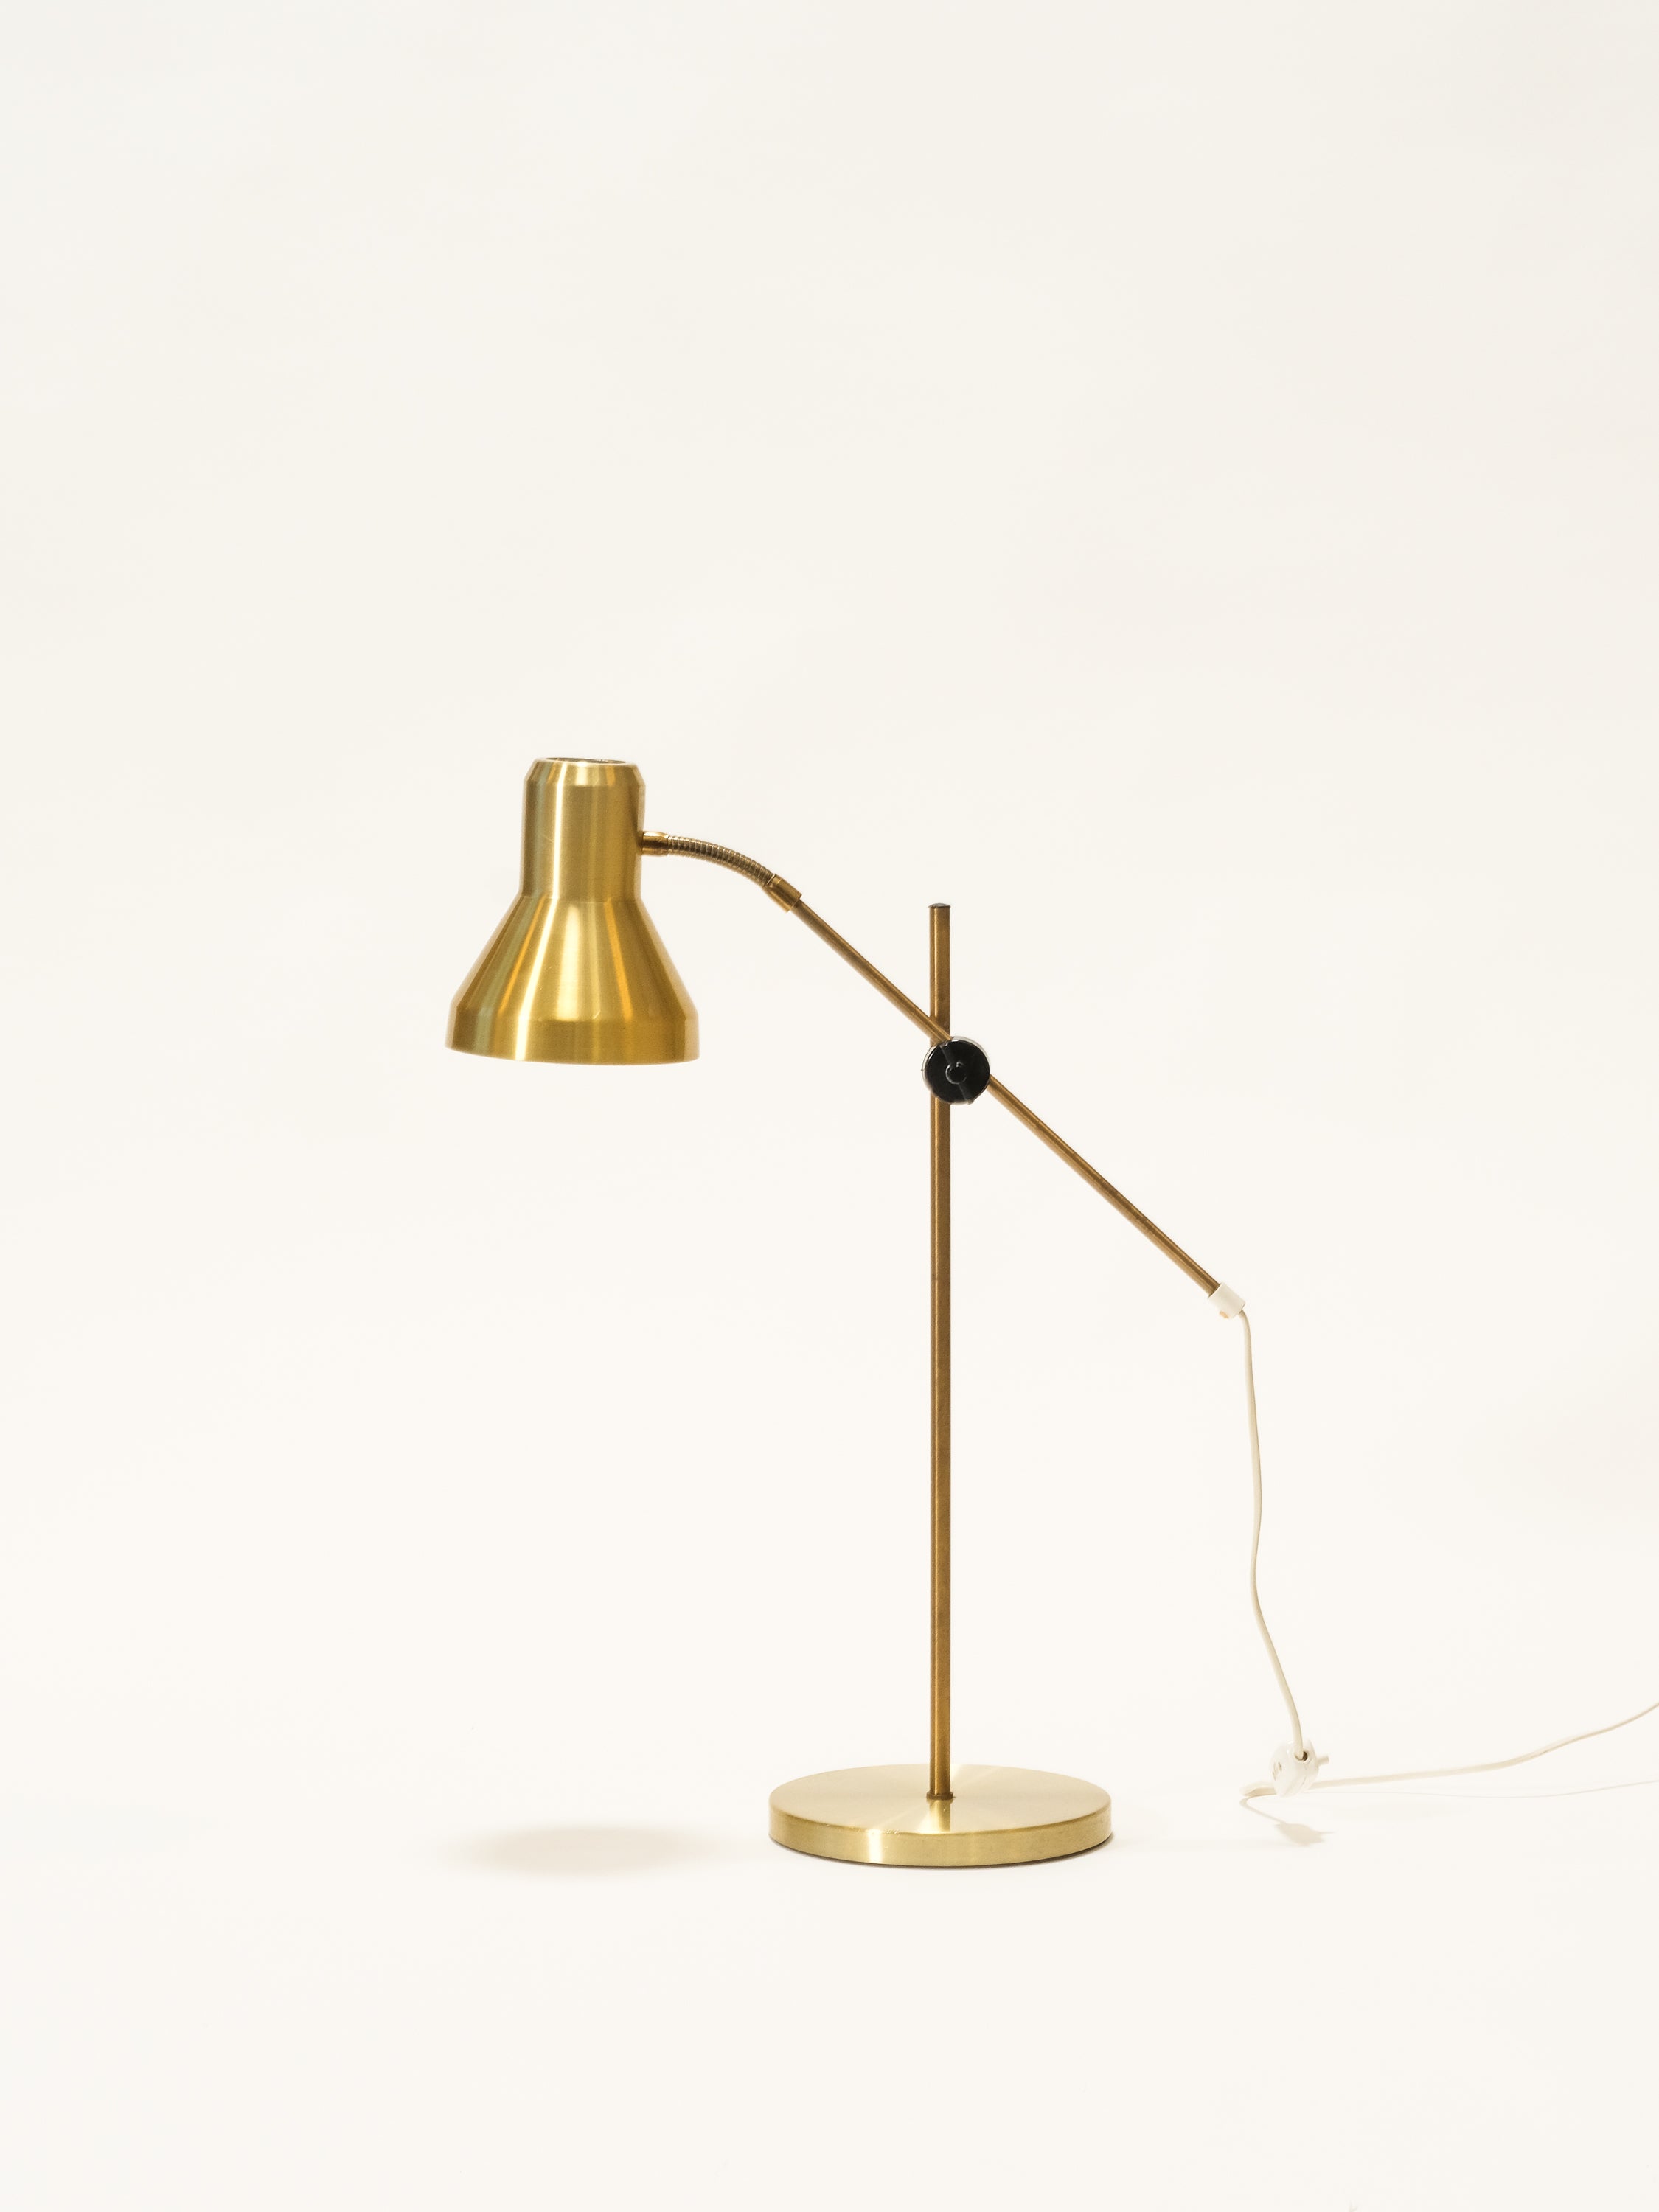 Brass Table Lamp, 1960s